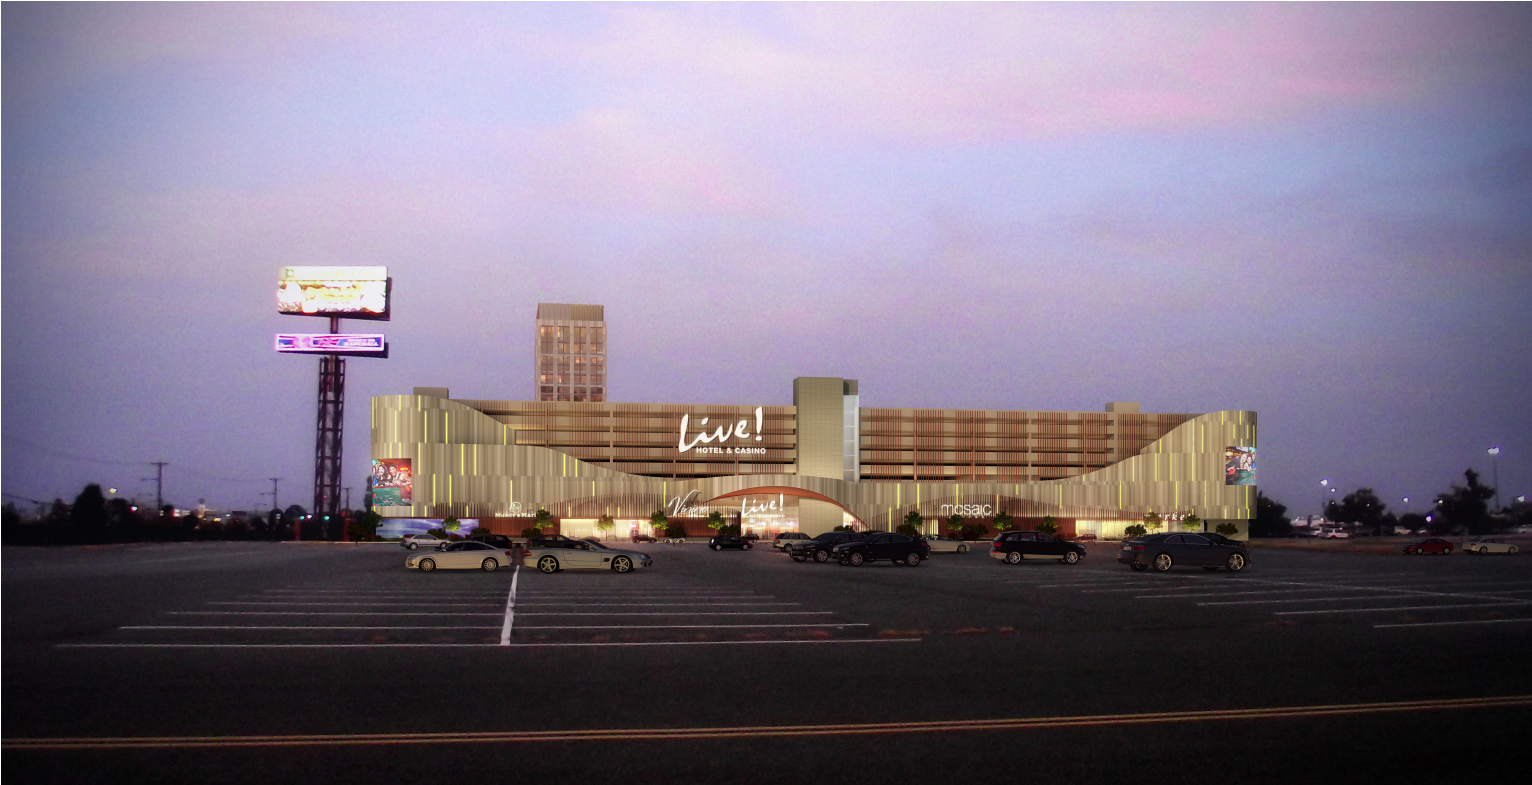 Live! Hotel and Casino, 10th Street Parking Lot | BLT Architects